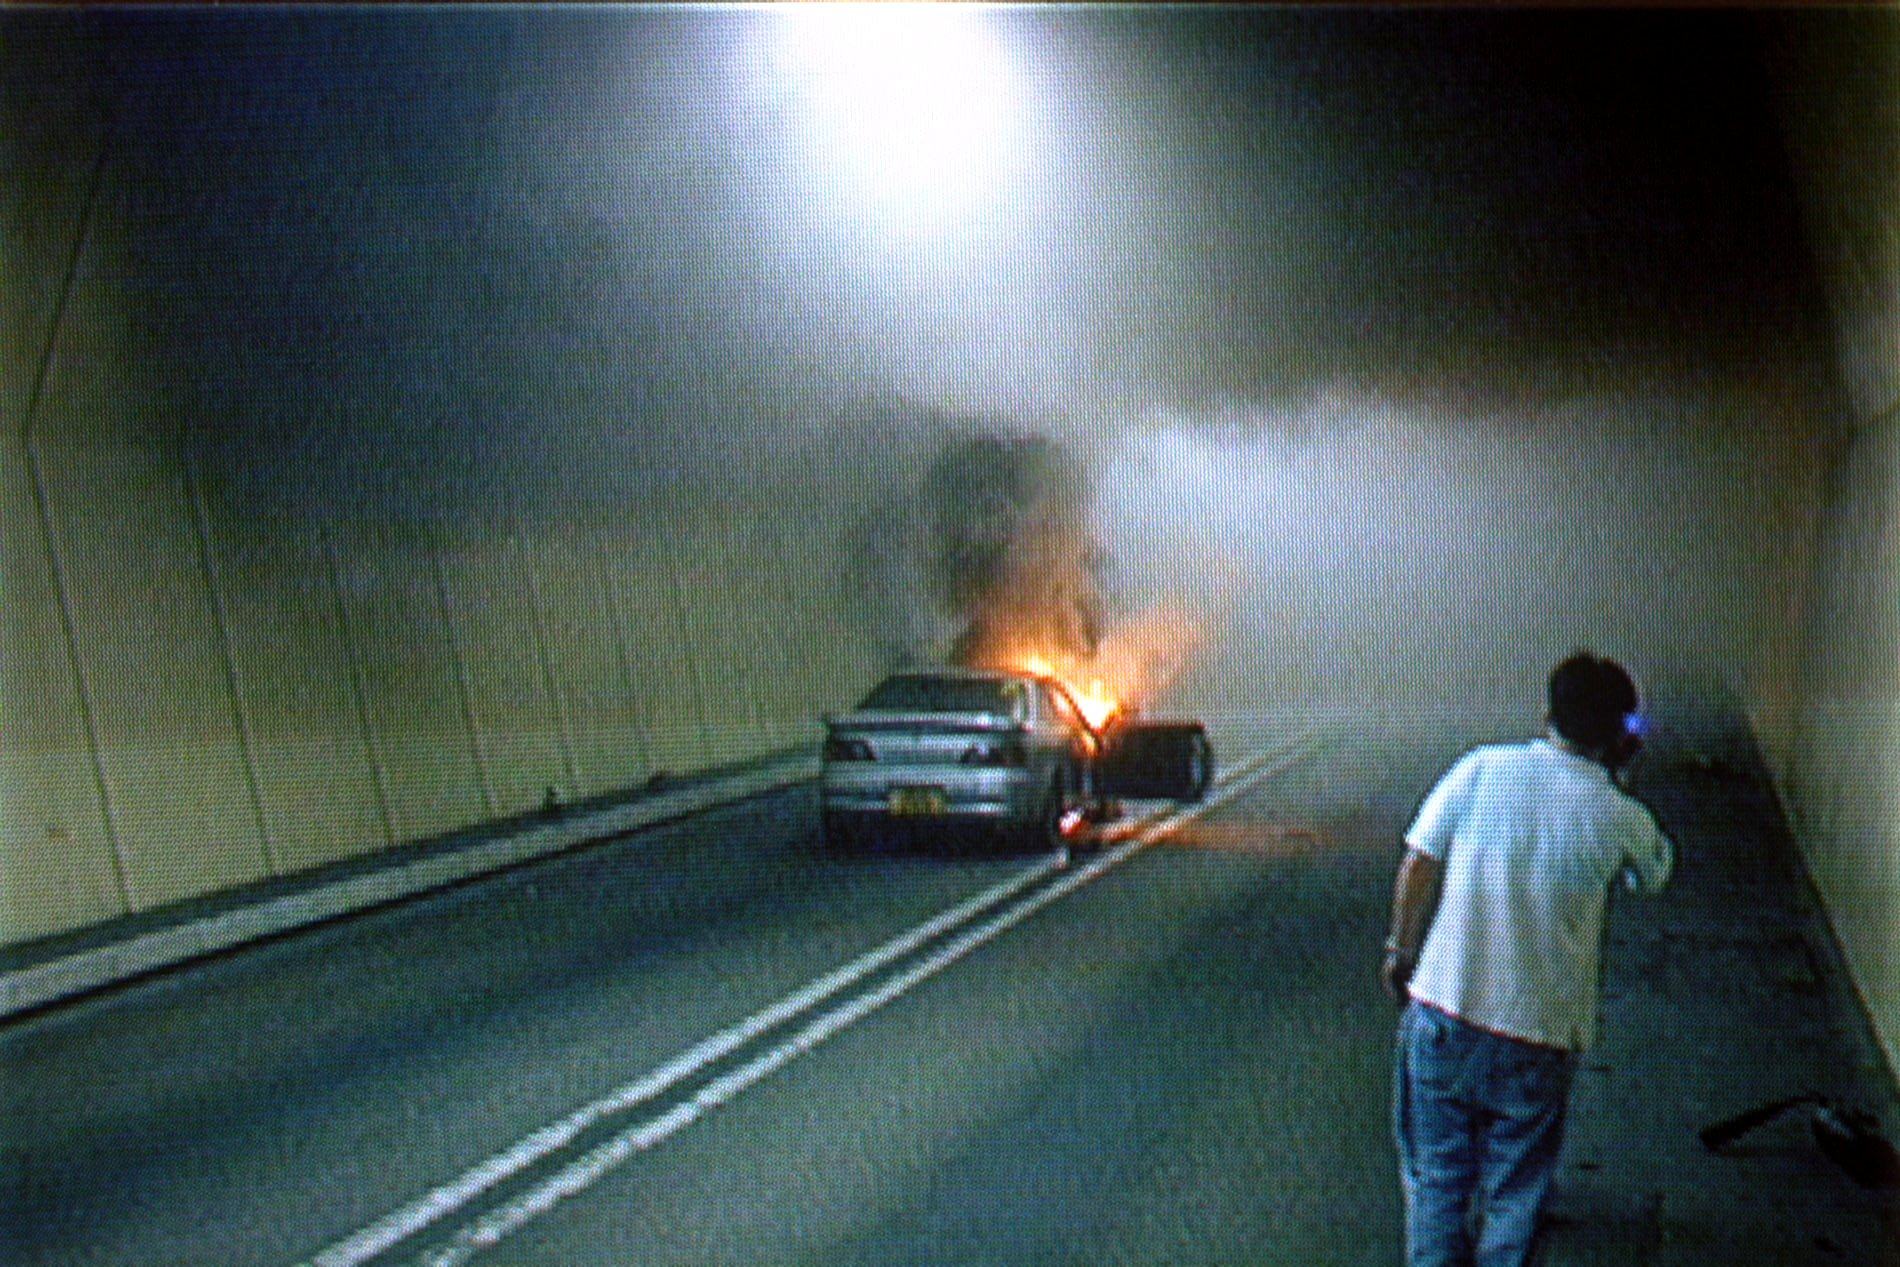 The car that caught fire in the middle of the Kowloon-bound section of Hong Kong’s Cross-Harbour Tunnel on May 29, 2000. Photo: SCMP